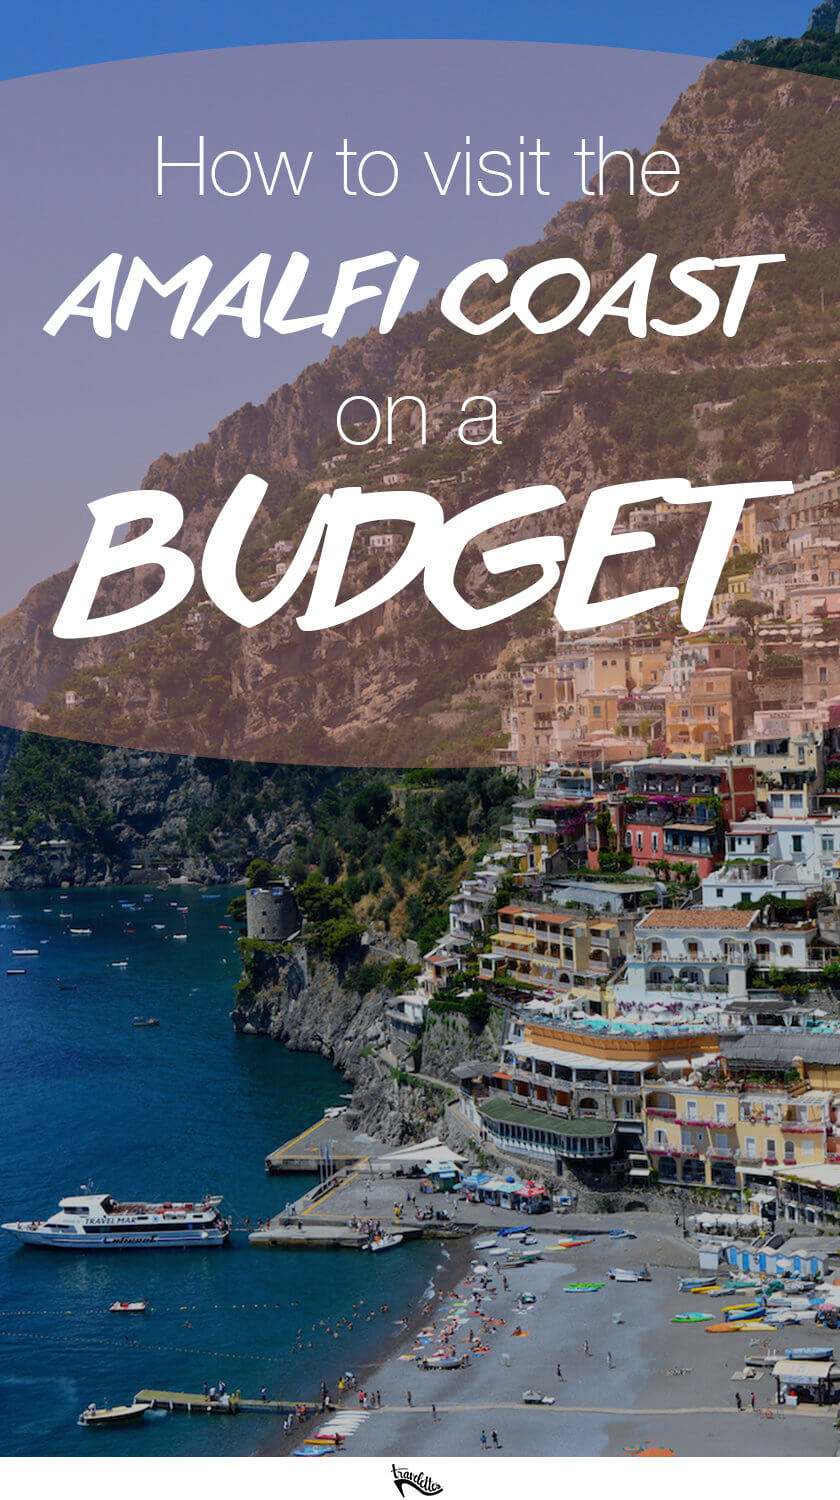 Dreaming of a trip to Positano and the Amalfi Coast? Here is how to travel the Amalfi Coast on a budget!